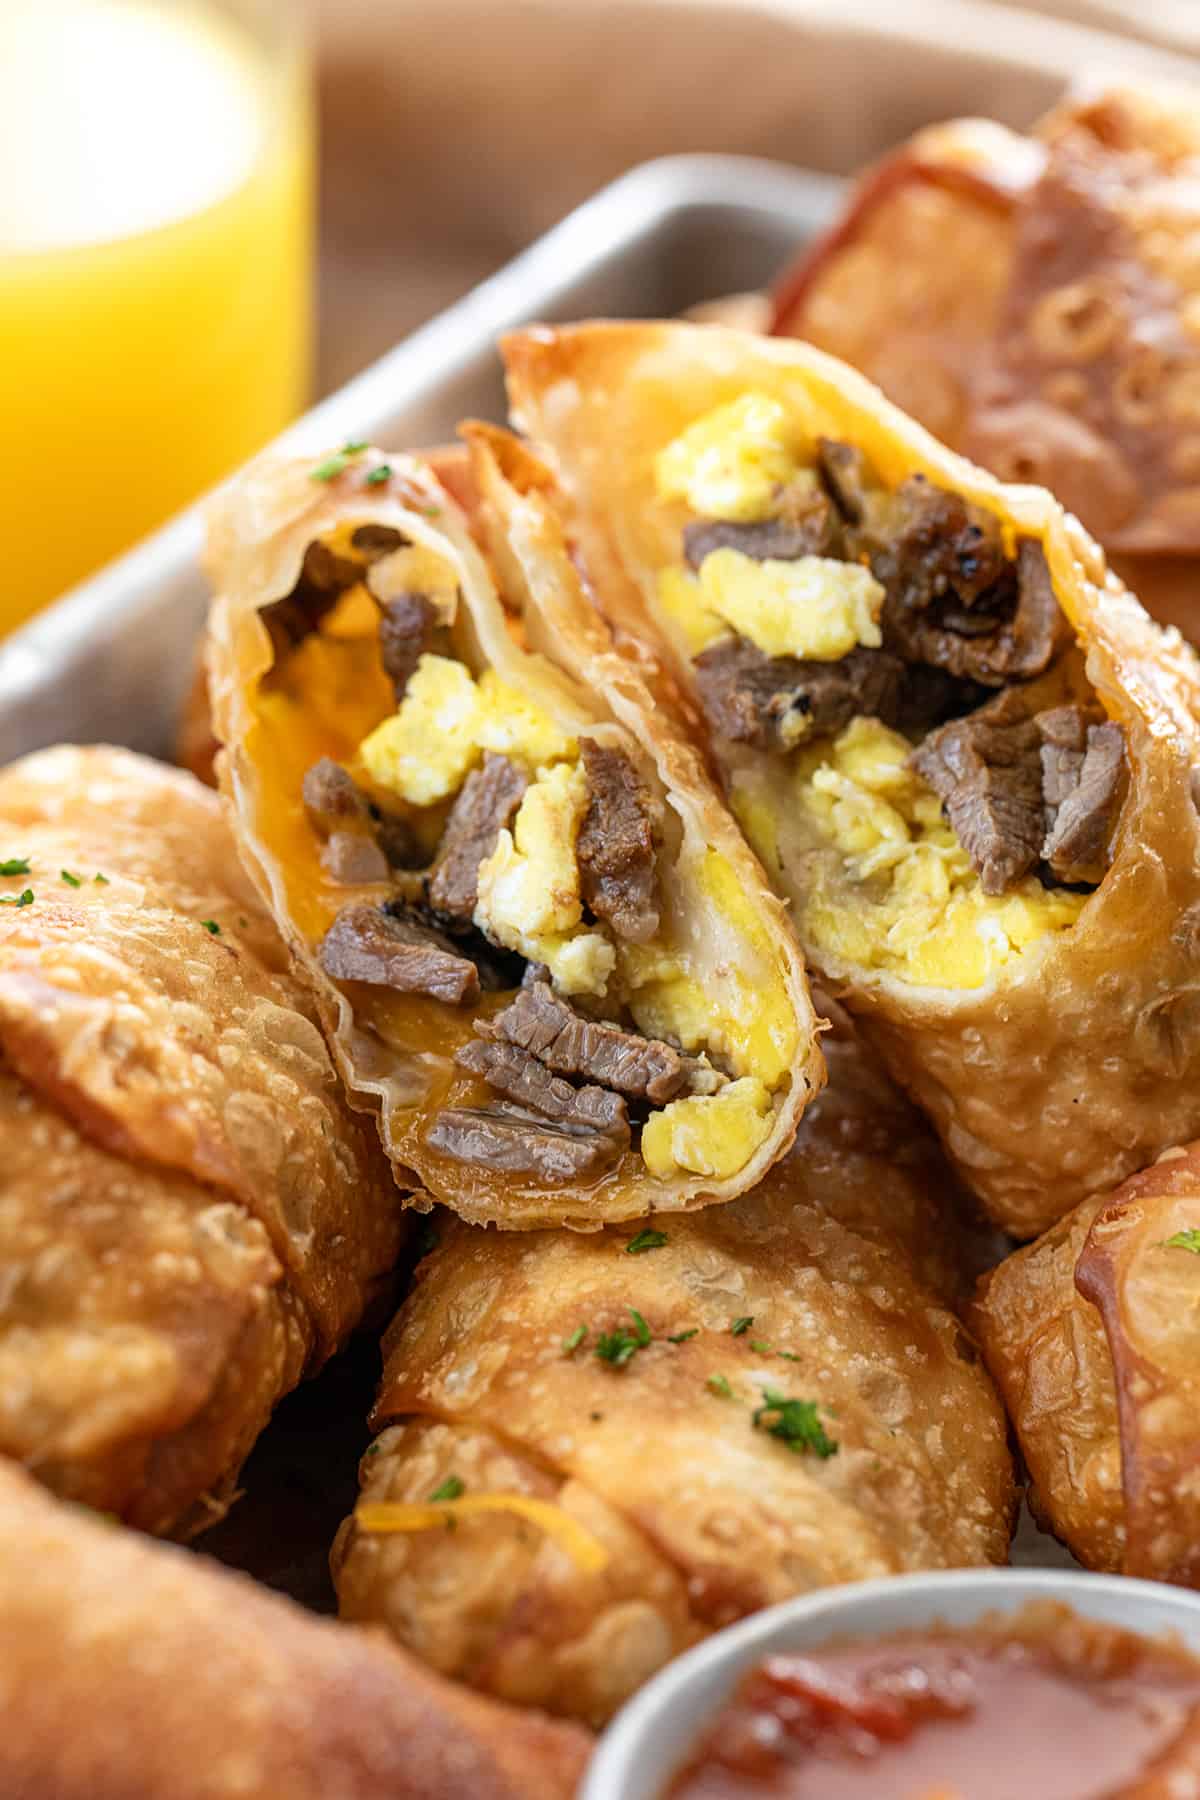 Close up of Cut in Half Steak Egg and Cheese Egg Rolls Showing Steak and Scrambled Eggs Inside.